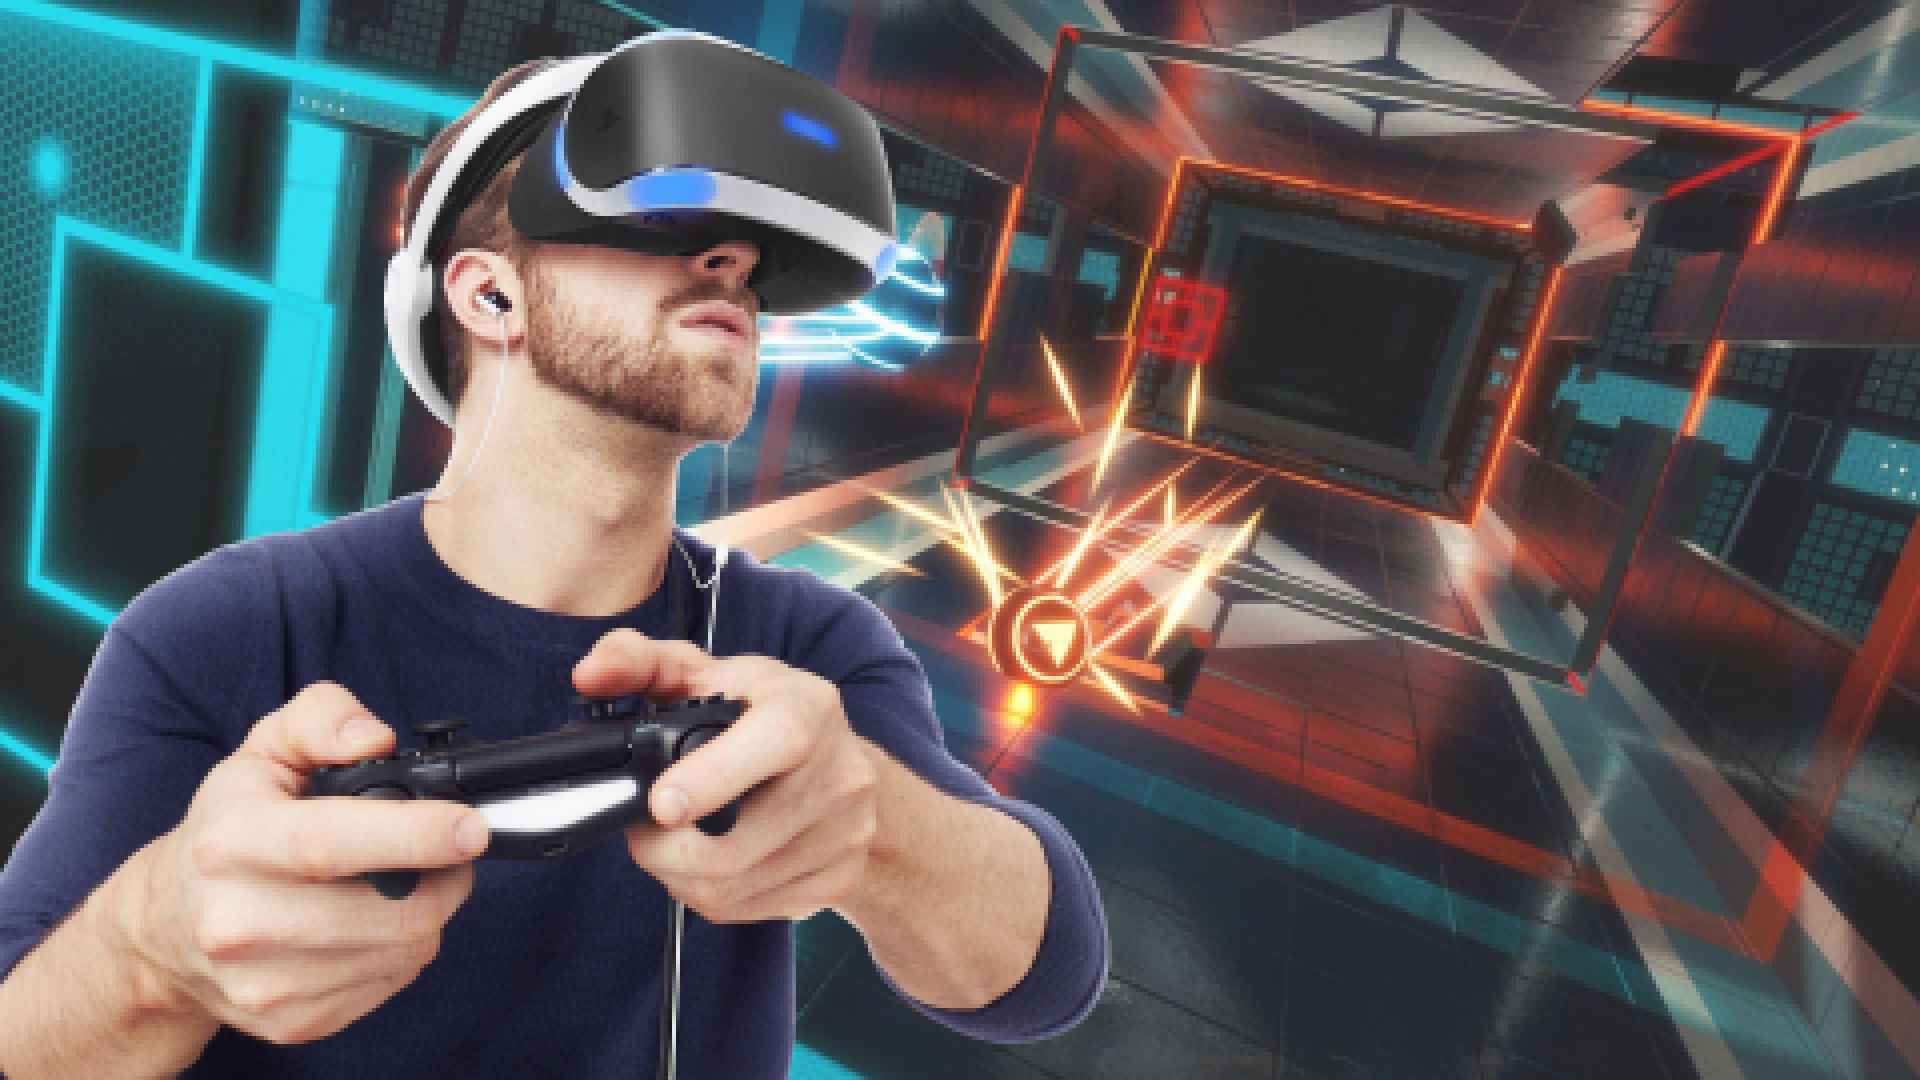 Download VR games for Android - Best free VR (Virtual Reality) games